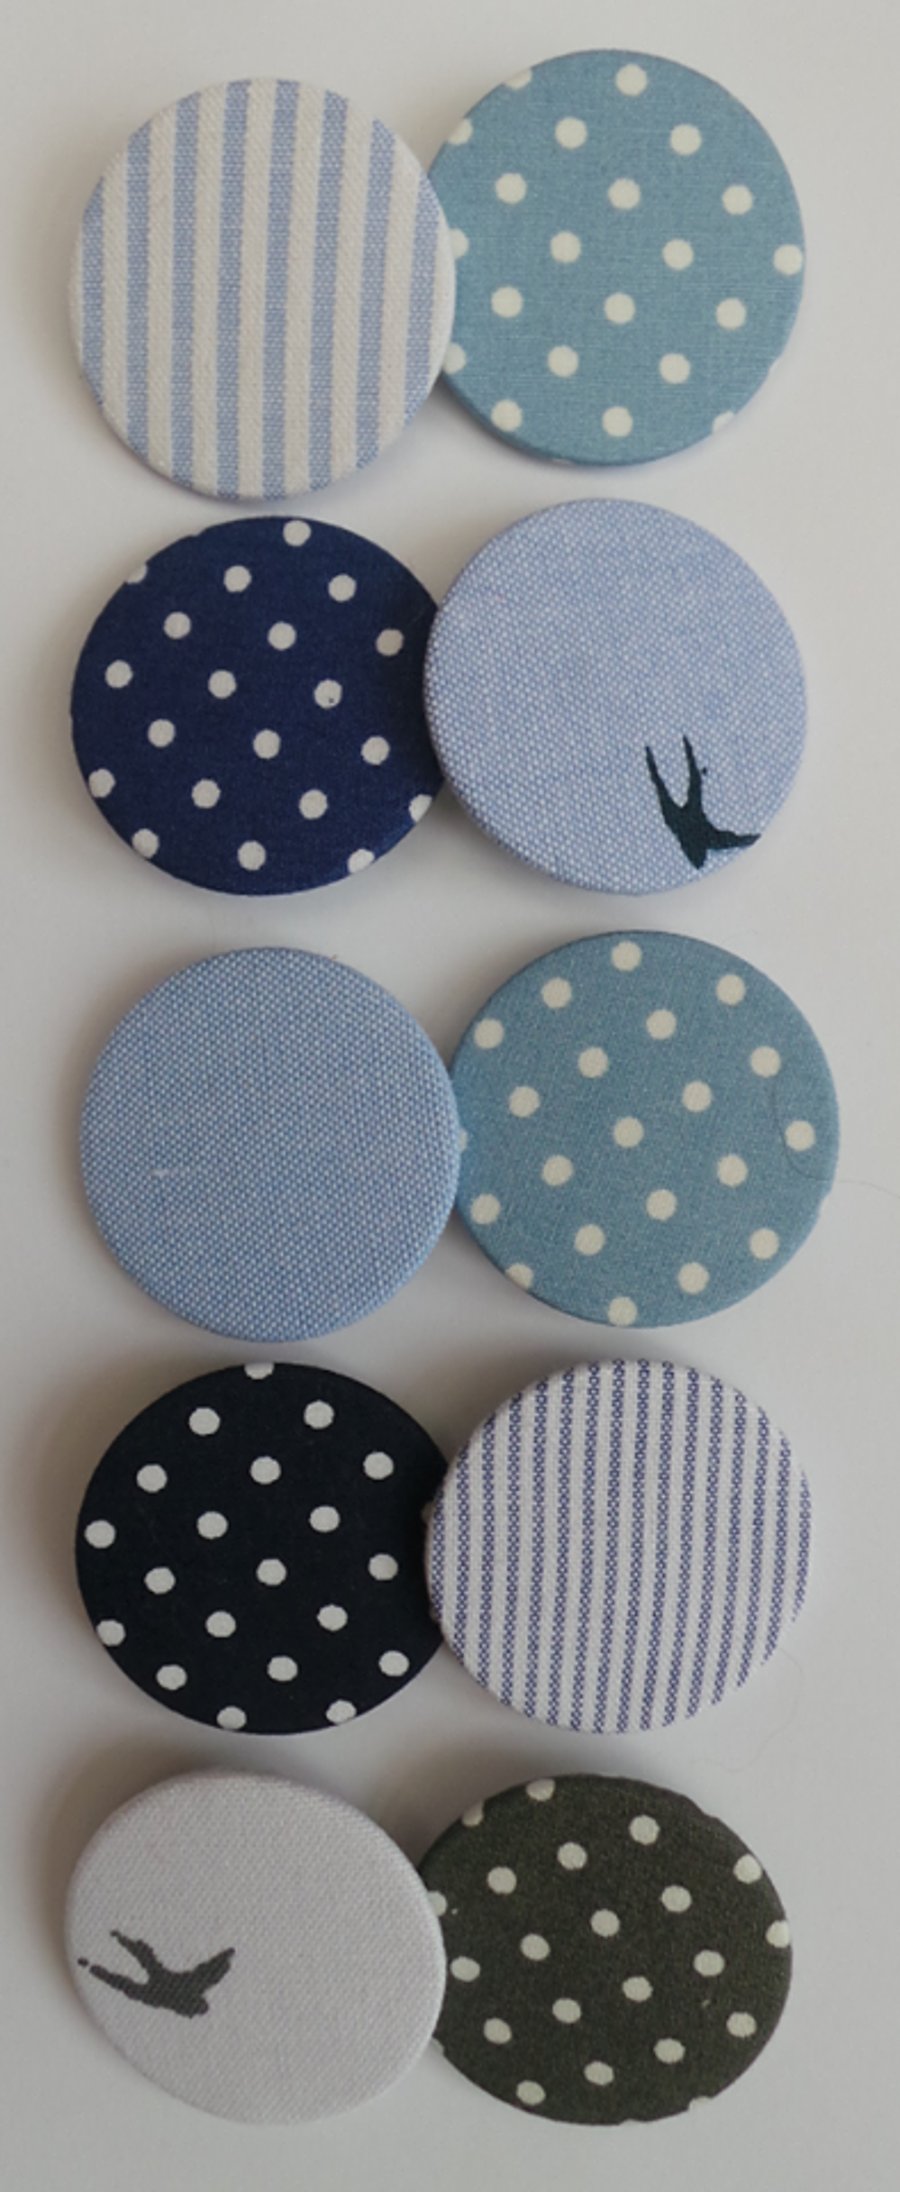 Blue Bird Collection Fabric Covered Badges one patterned one polka dot 2 pack